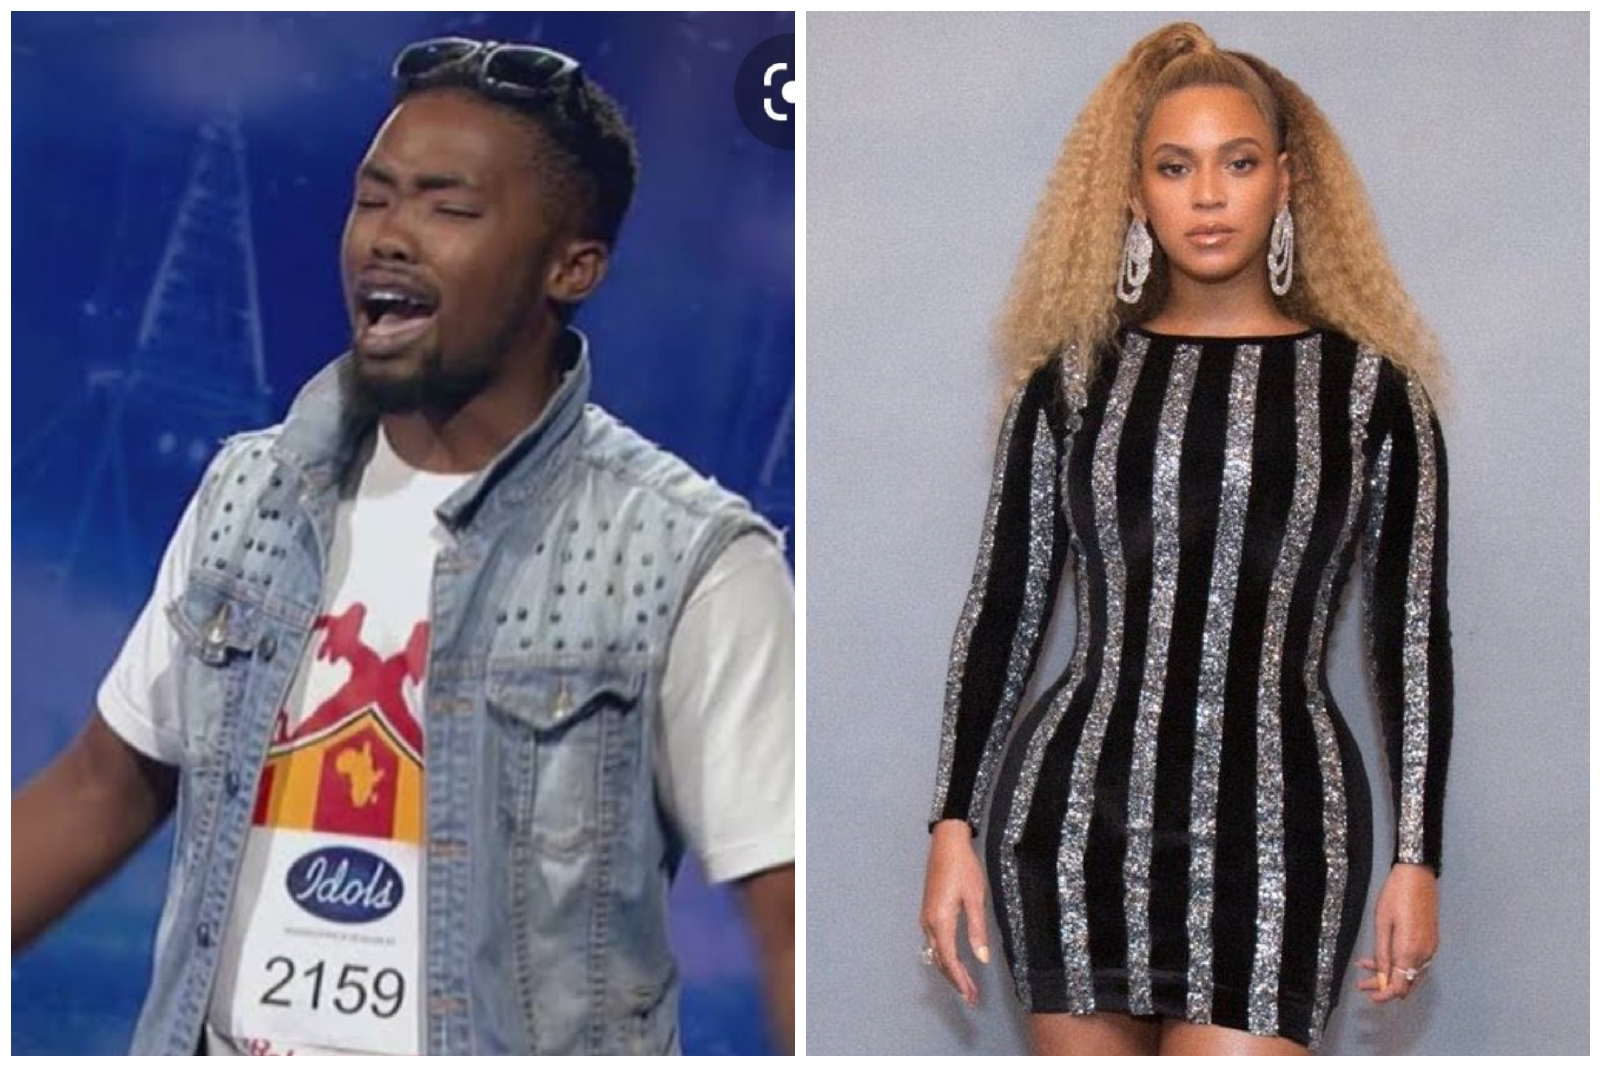 Phila Madlingozi, gets dragged by Beyhive after telling Beyonce Queen B ...